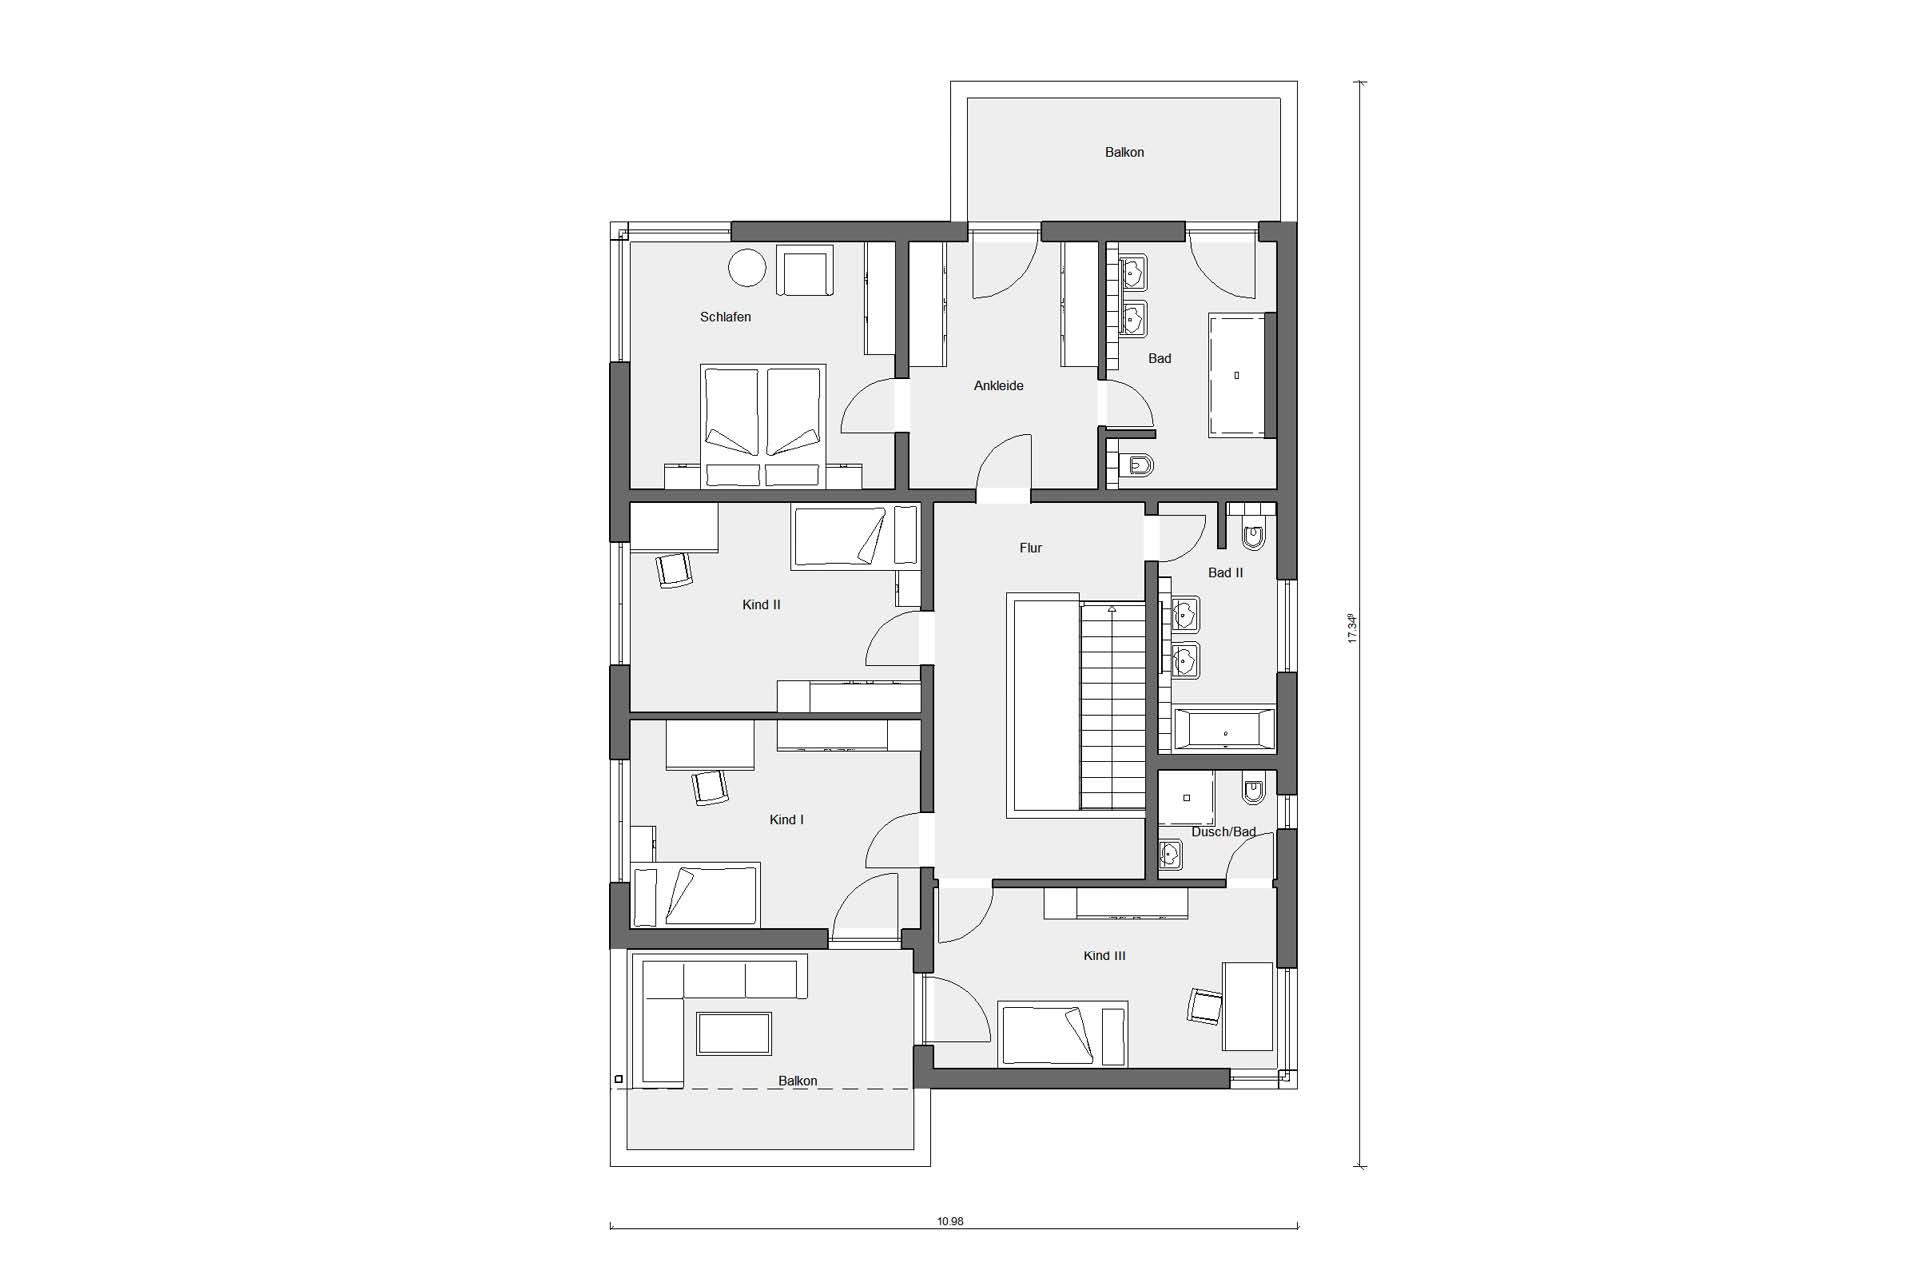 Ground floor attic Detached house Bauhaus style with flat roof E 20-207.1